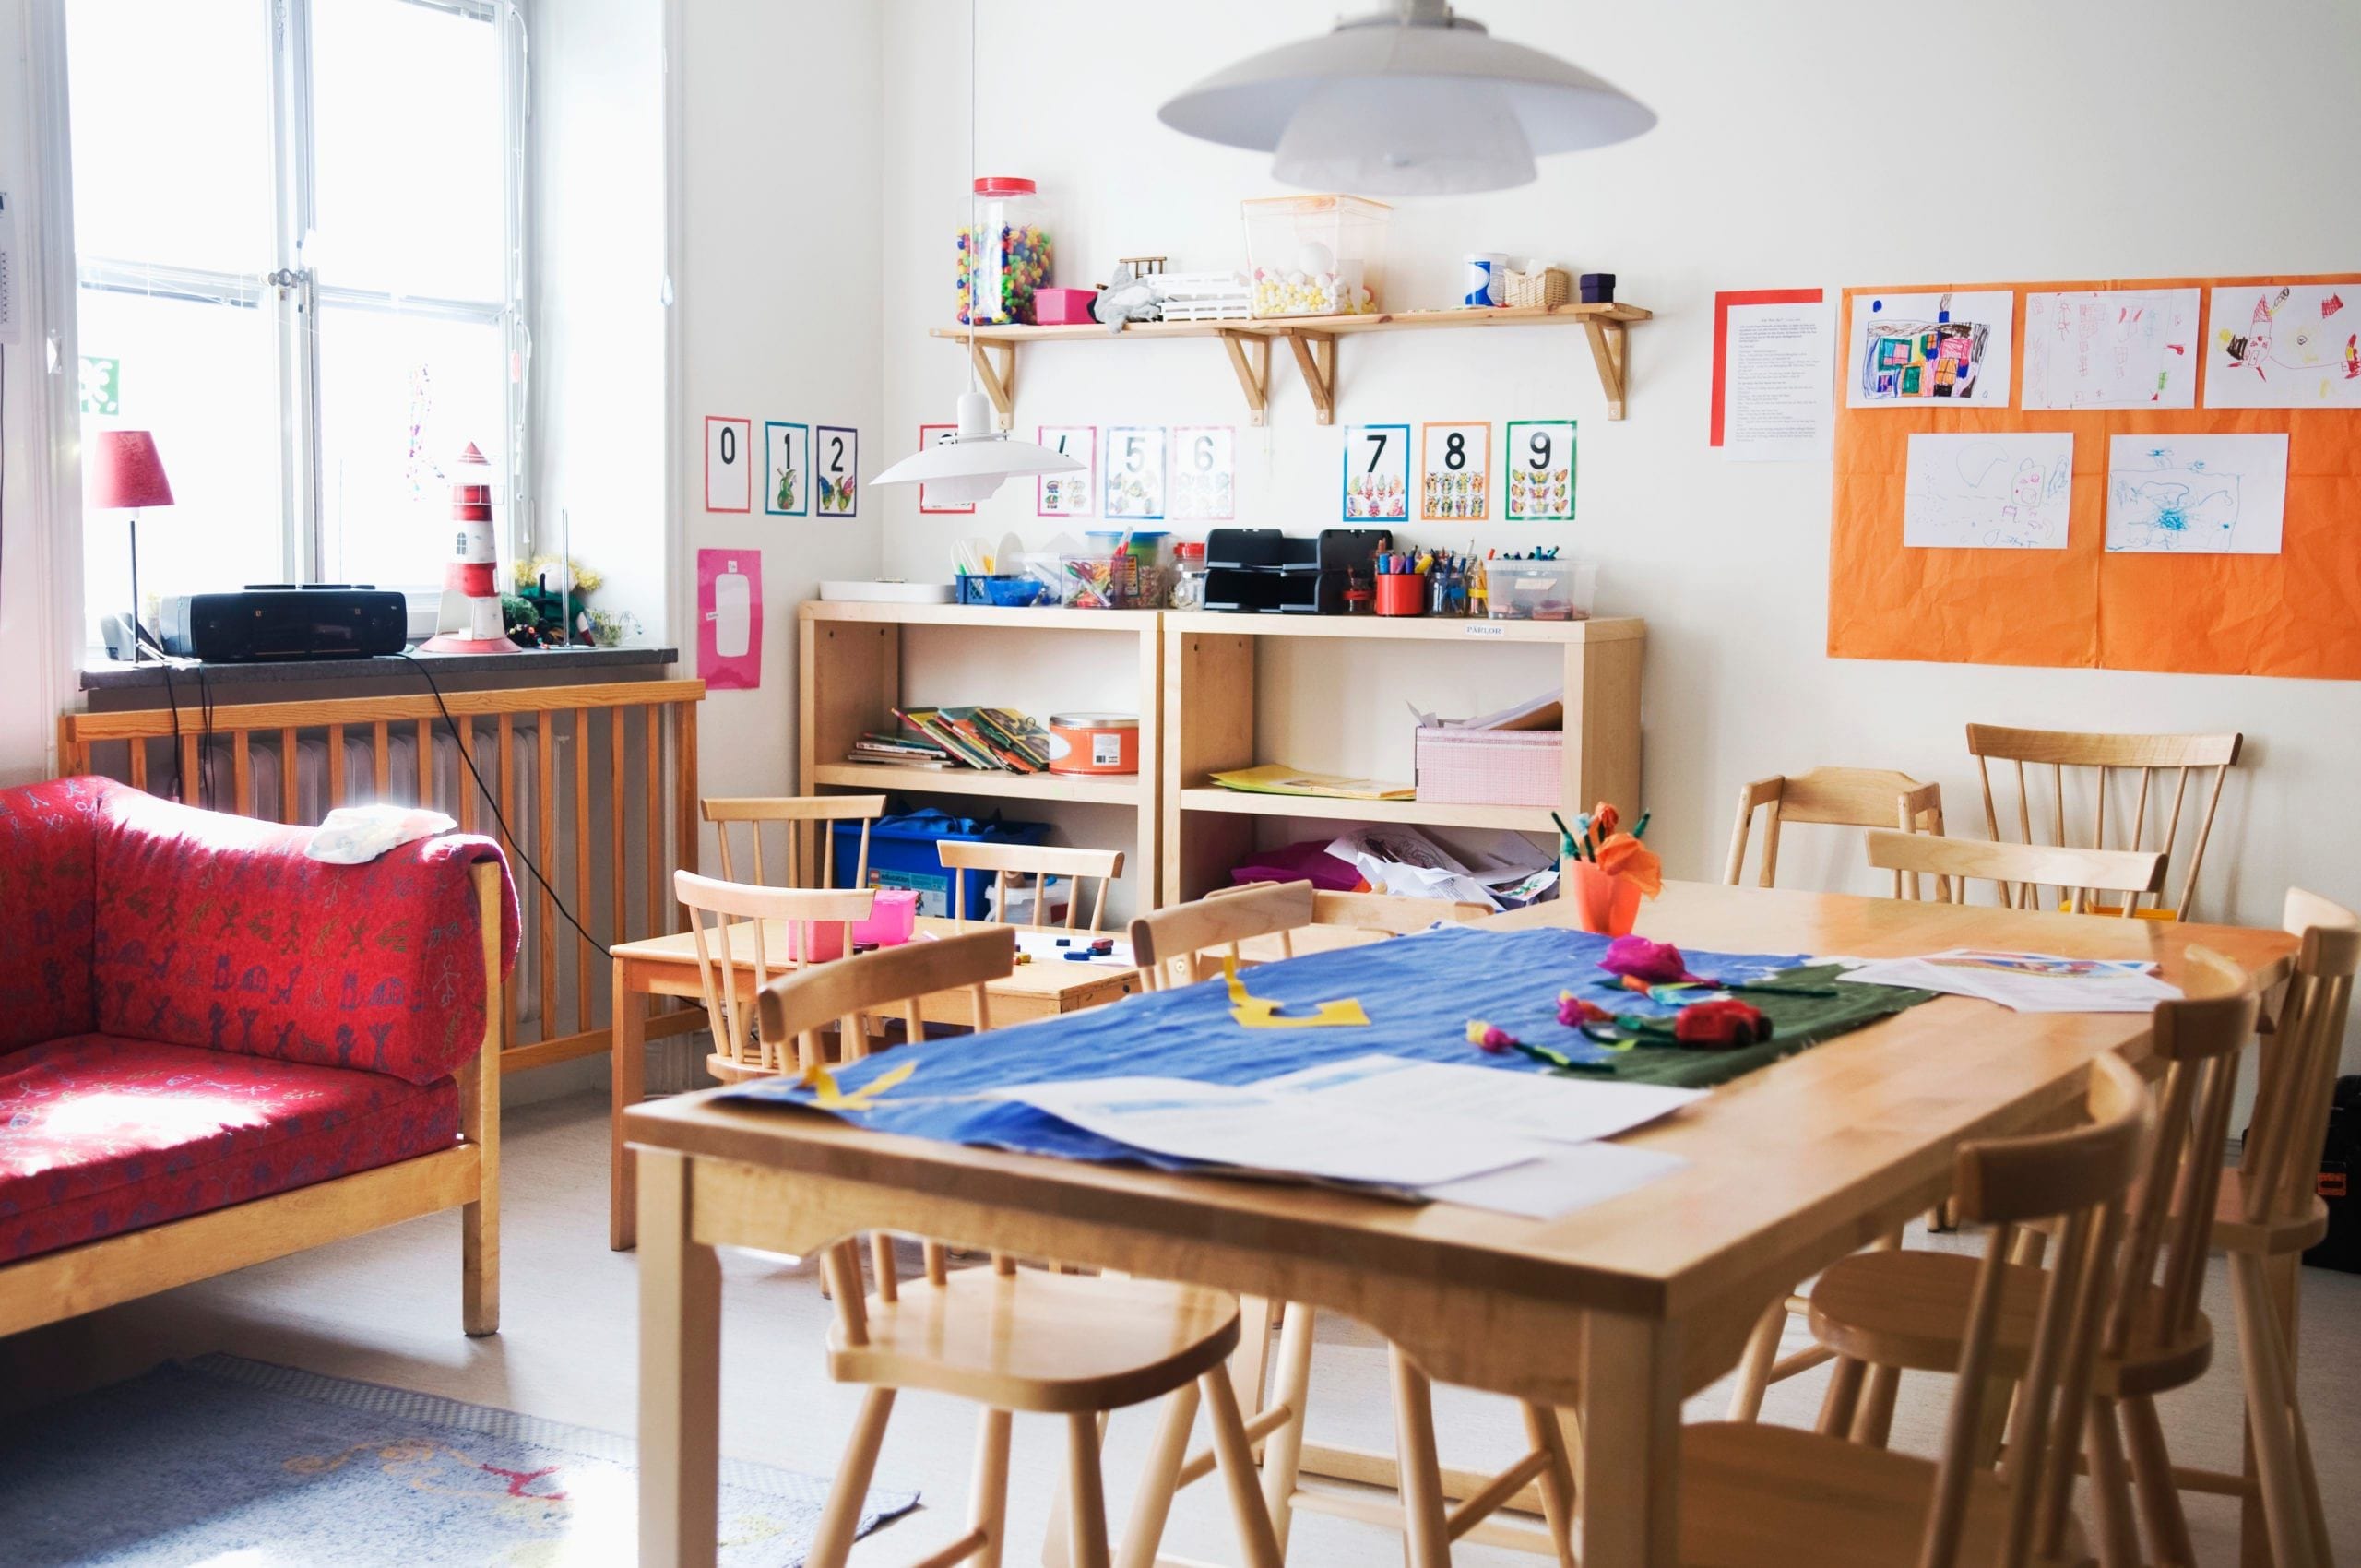 What You Need to Know About Daycare Vouchers